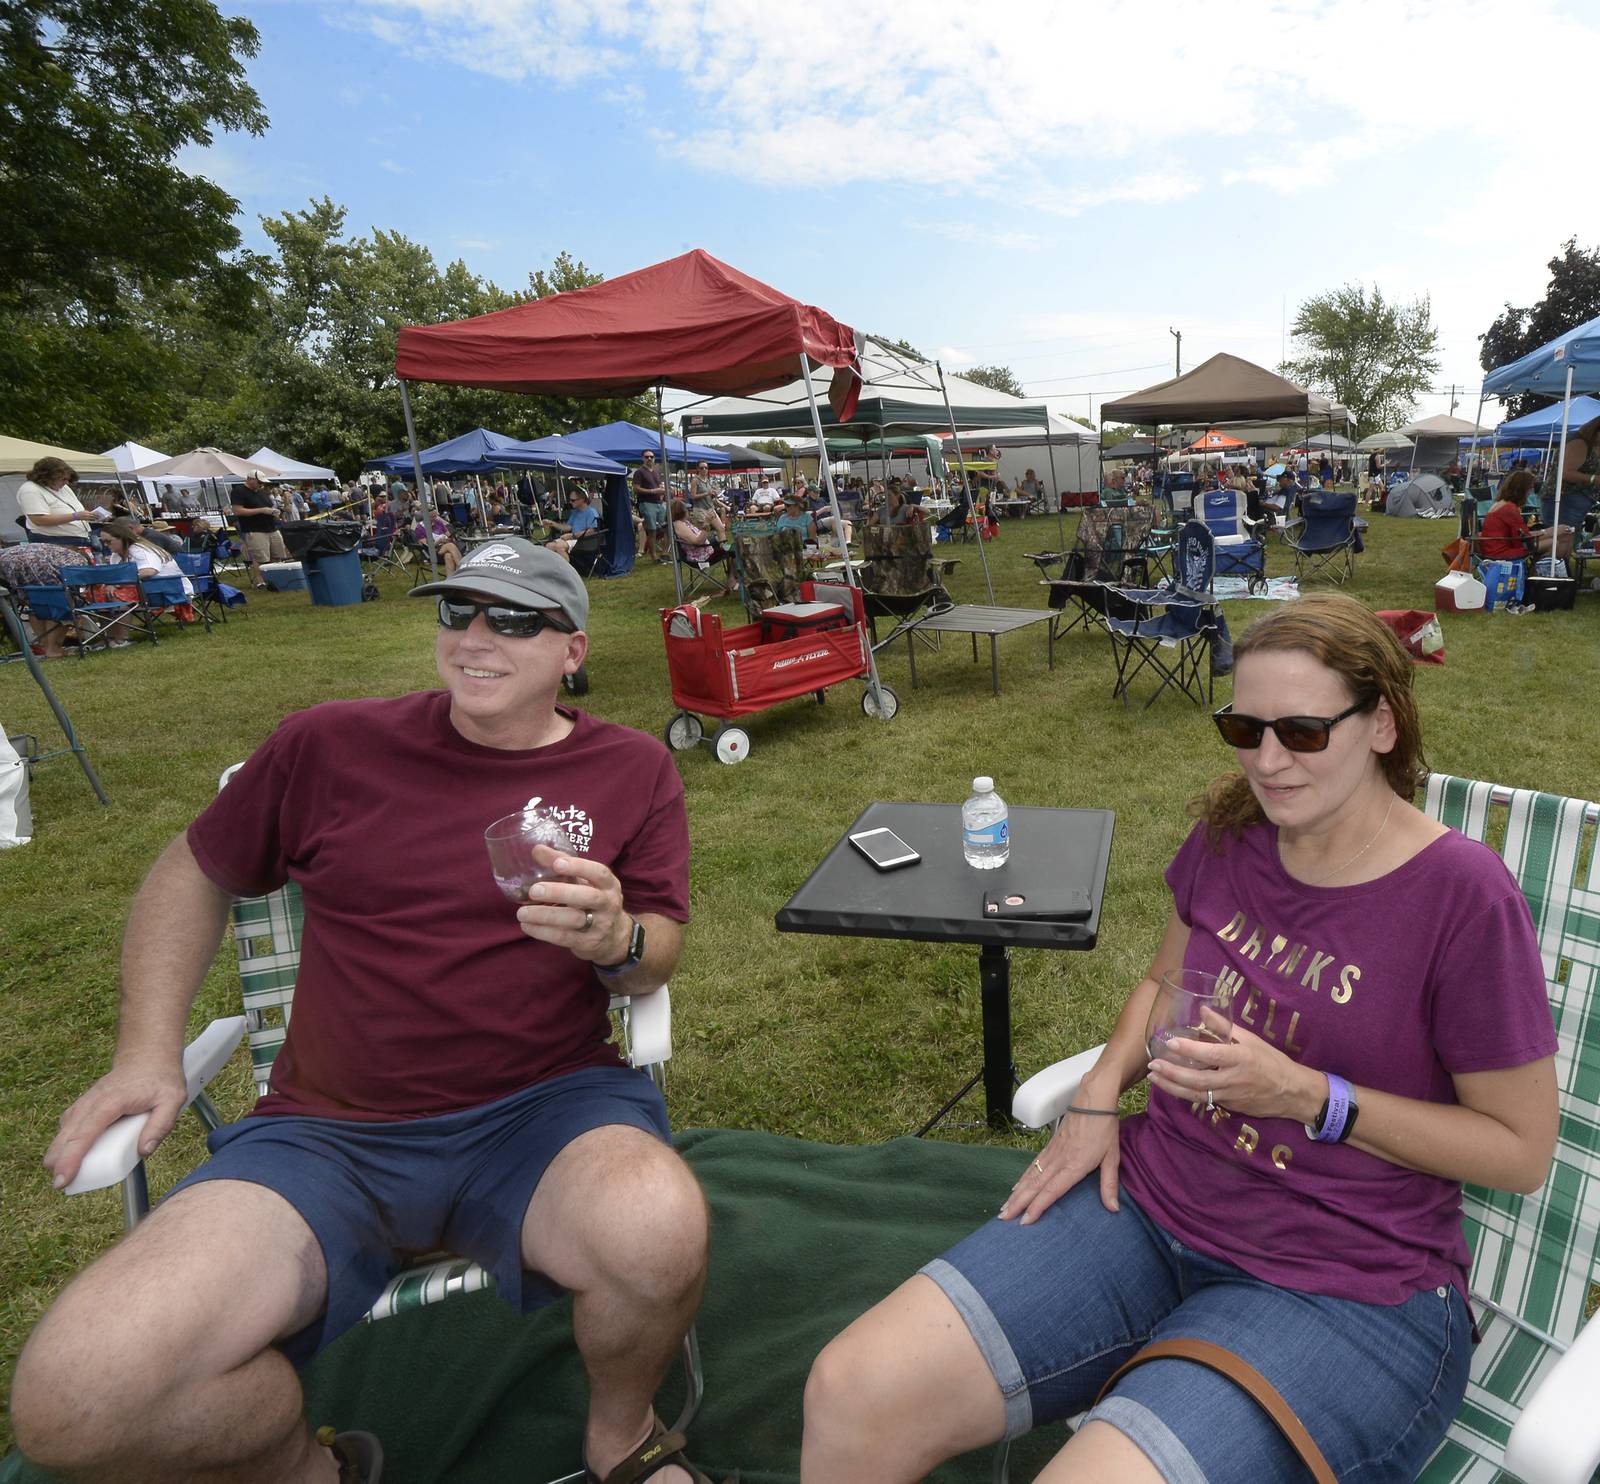 Utica hosts thousands at Vintage Illinois Wine Fest – Starved Rock Country